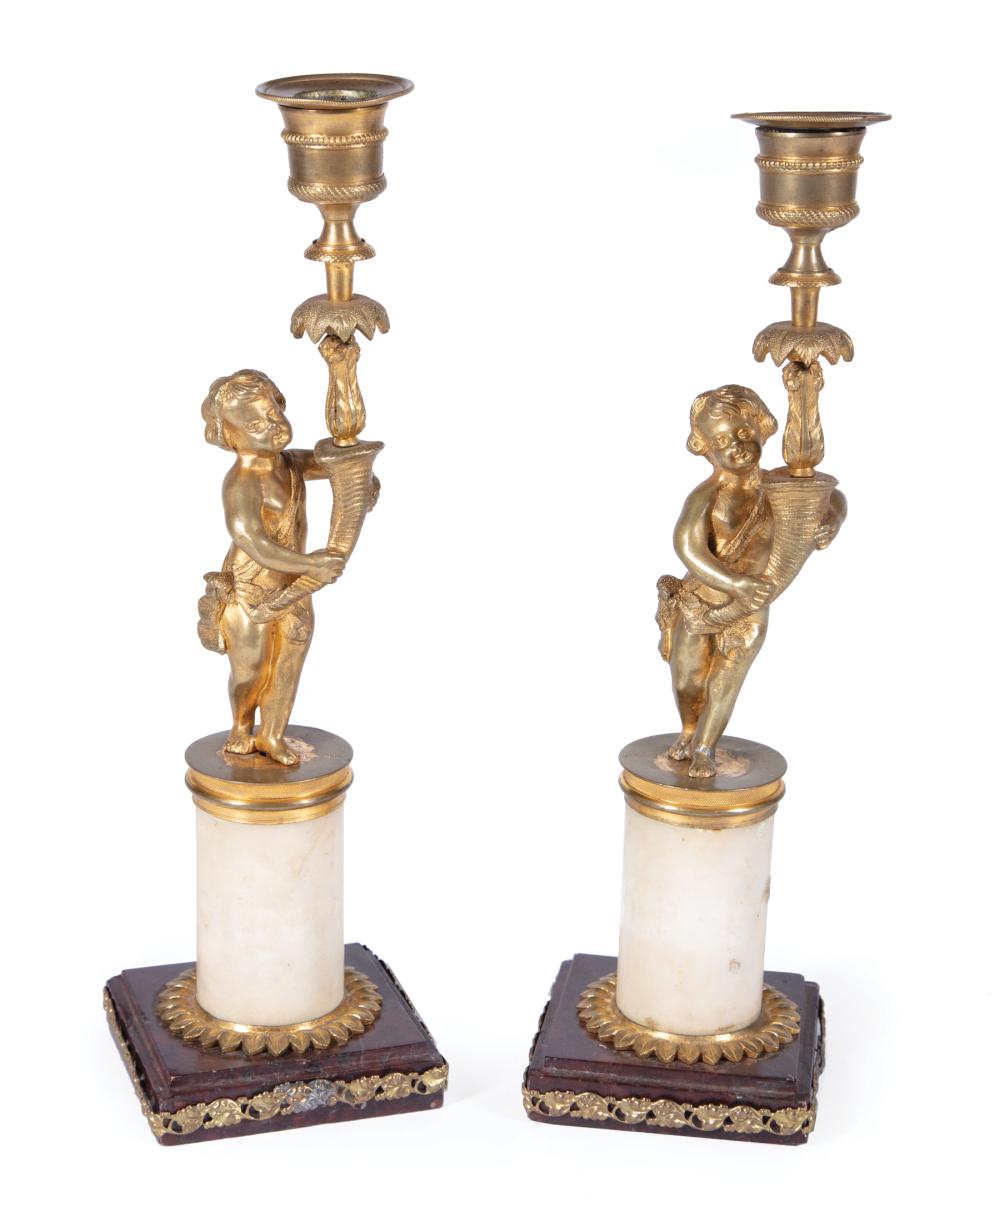 REGENCY BRONZE AND MARBLE FIGURAL 318b5f